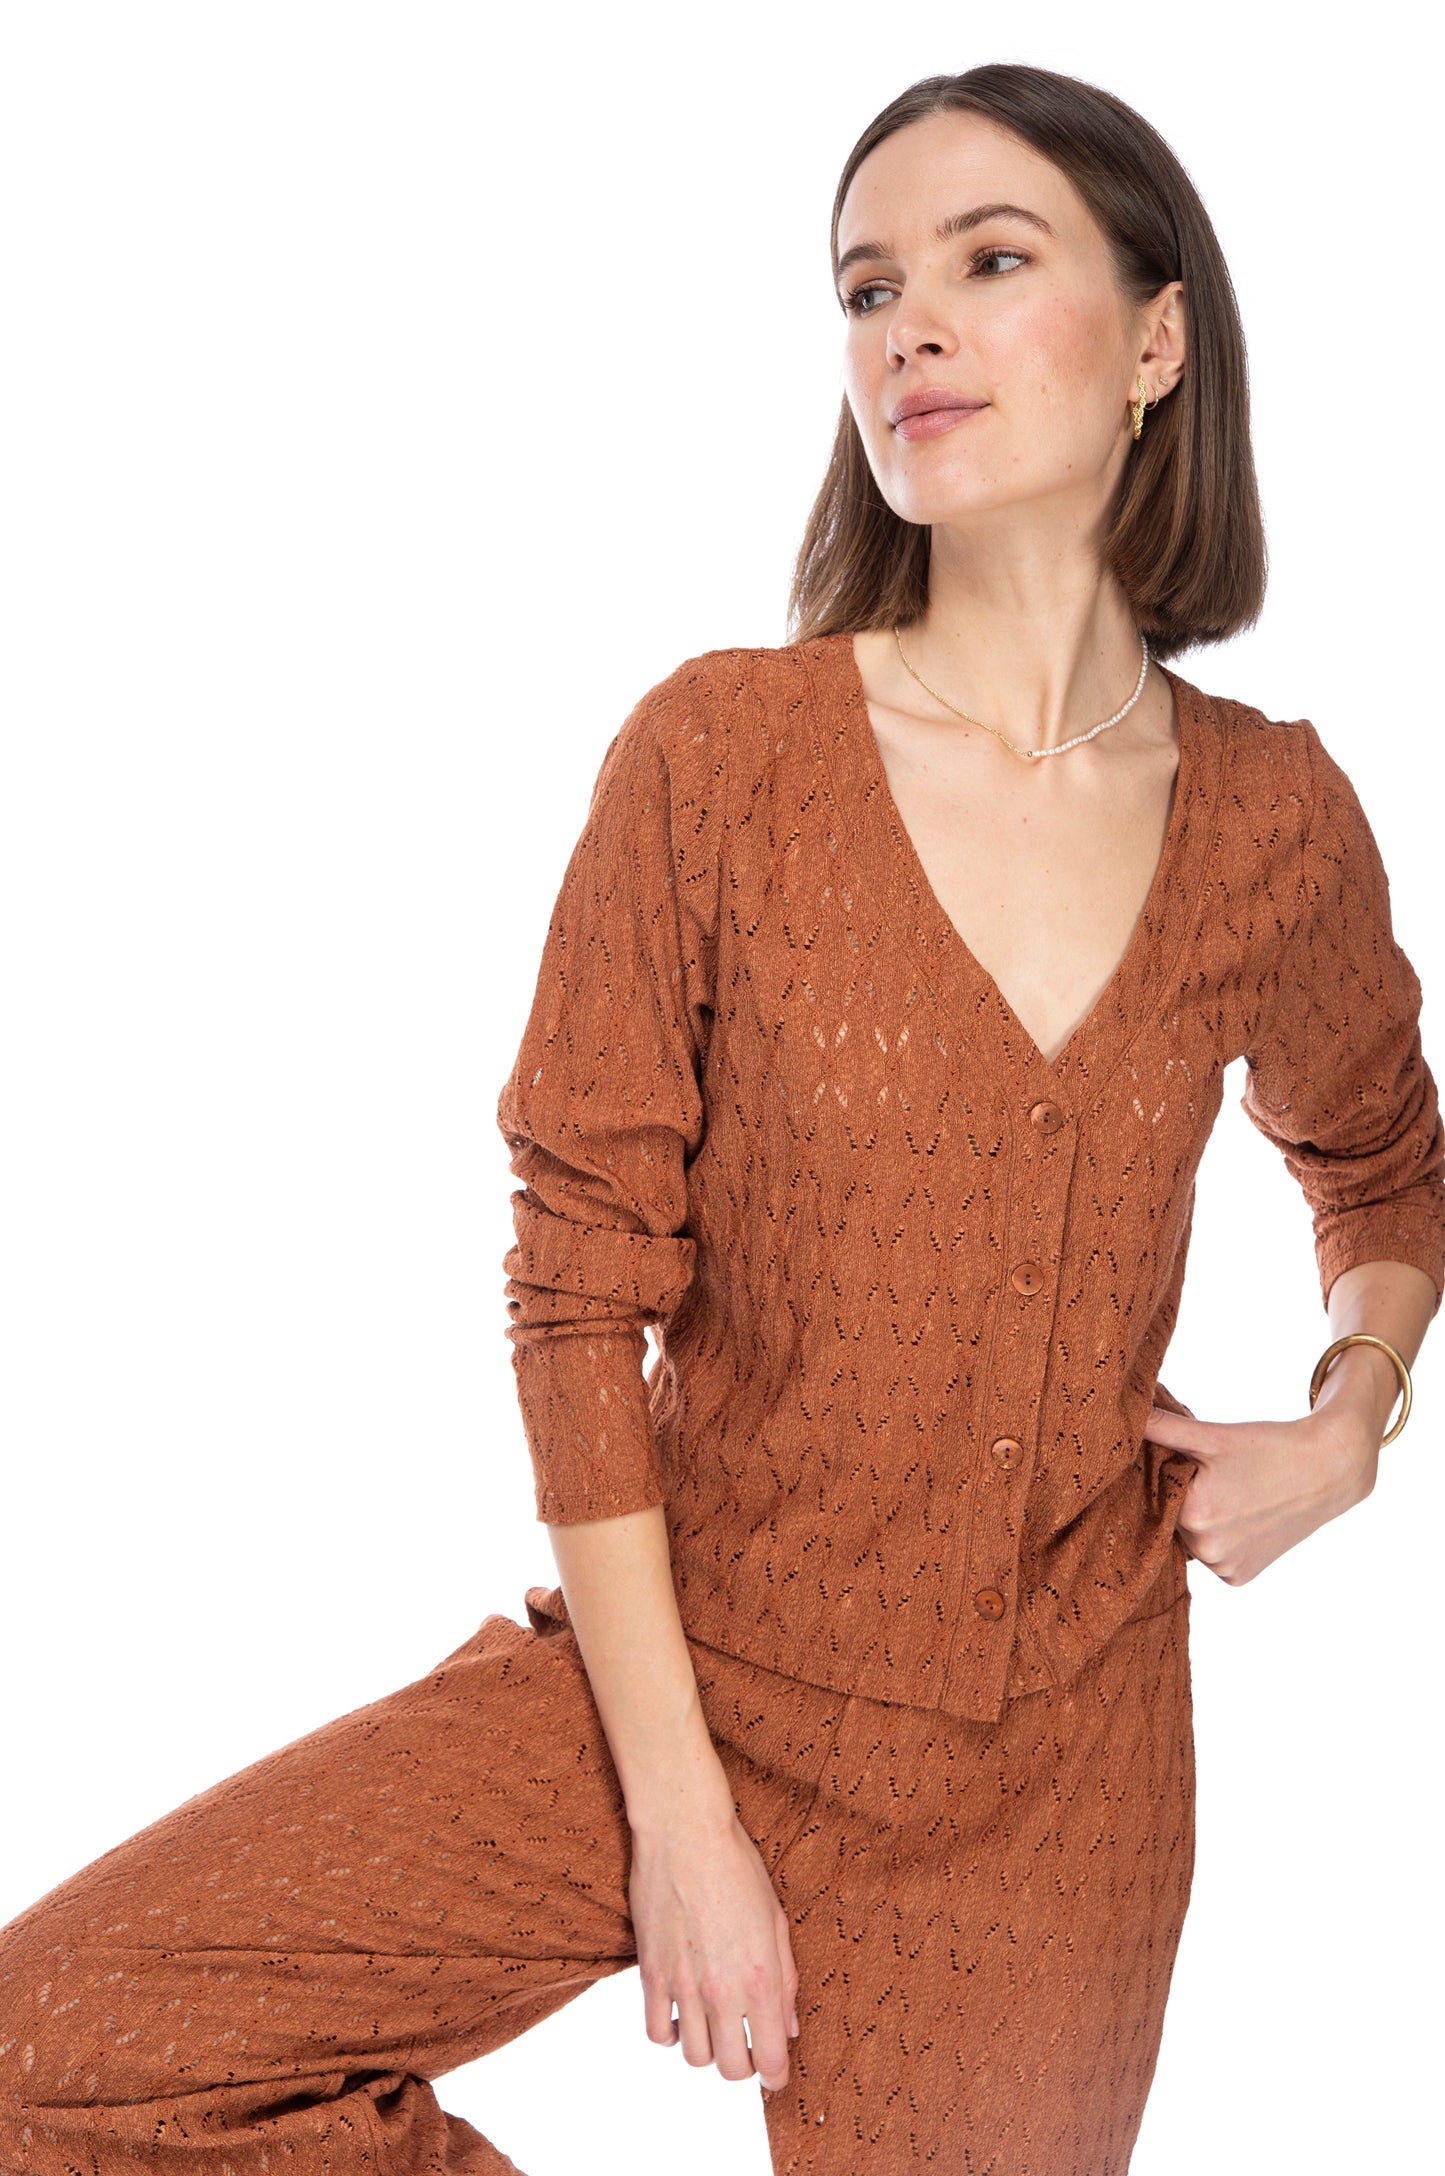 A woman posing confidently in a stylish rust-colored B Collection by Bobeau LS CROP BTTN CARDIGAN and matching Gilly ankle length pants, accessorized with a delicate necklace.